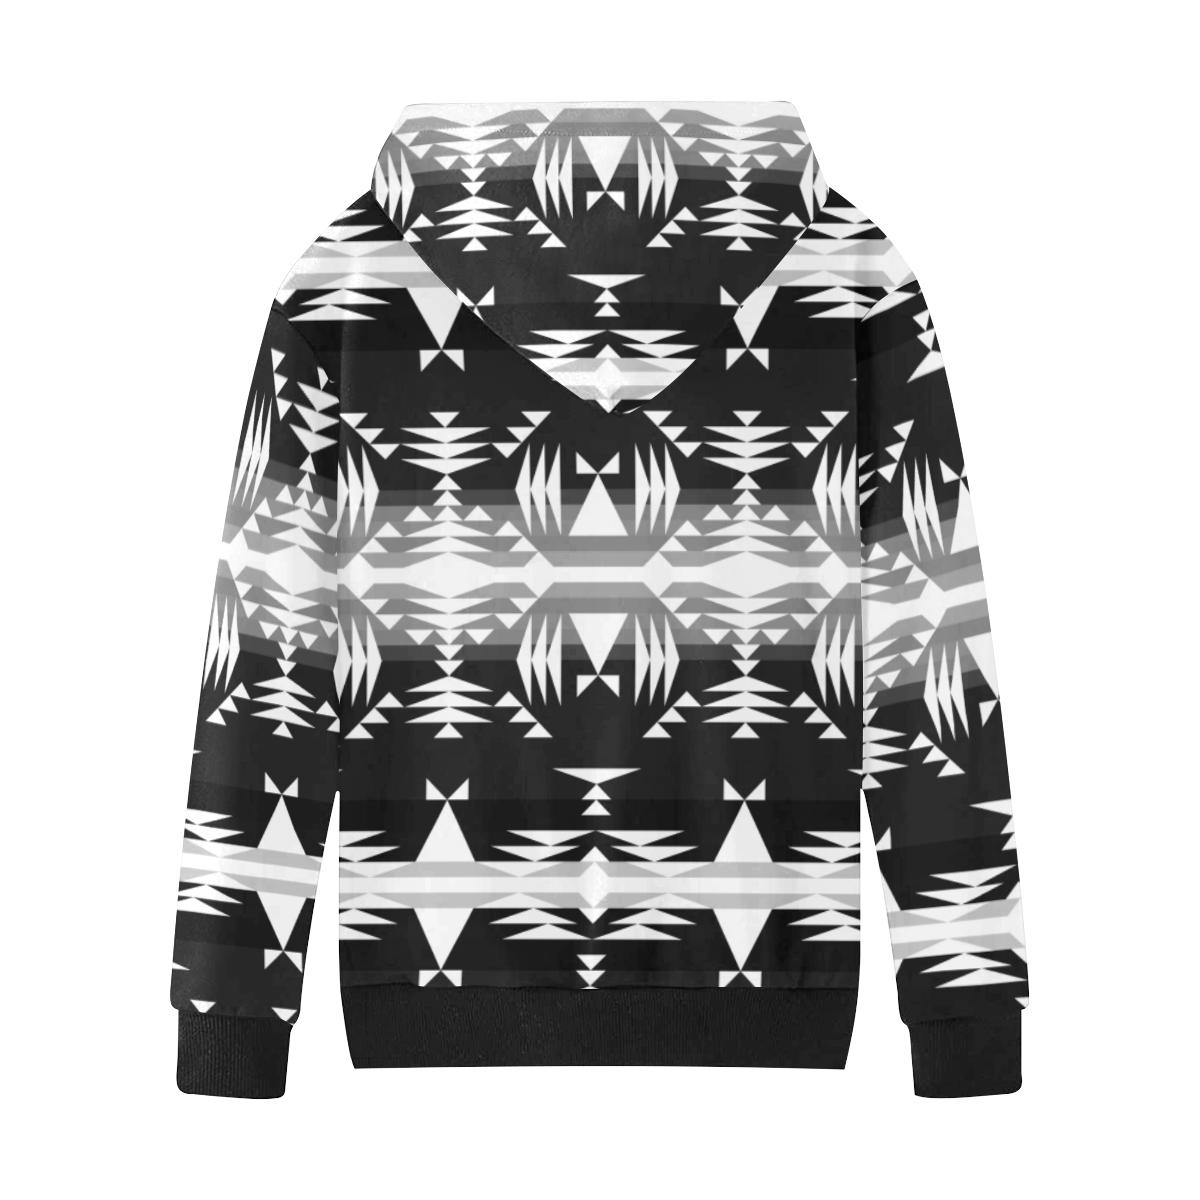 Between the Mountains Black and White Kids' All Over Print Hoodie (Model H38) Kids' AOP Hoodie (H38) e-joyer 